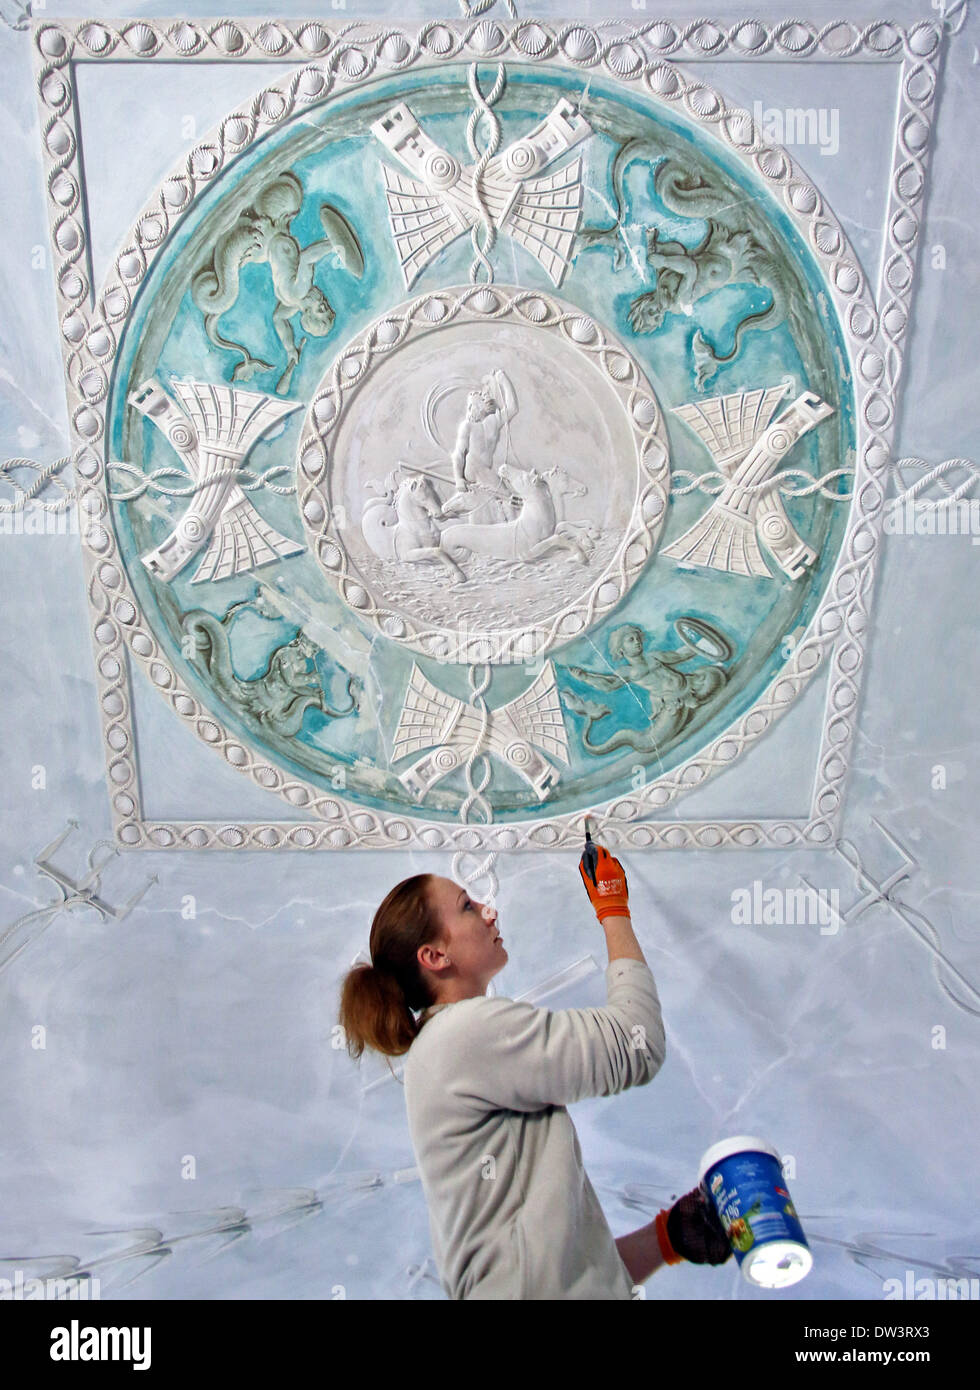 Restorer Michelle Eicke paints primer on the stucco ceiling in the preserved suite of Marshall Georg Heinrich von Berenhorst, at Woerlitz Palace in Woerlitz, Germany, 24 February 2014. There are six other similar suites of two rooms in the palace commissioned by Prince Leopold Friedrich Franz von Anhalt-Dessaut. They are being restored until 2016. The rooms were used by the prince and his family as well as Marshall Berenhorst and the architect Erdmanndorff. The palace is part of the UNESCO World Cultural Heritage and is an example of German neo-classicism. Photo: Jan Woitas Stock Photo